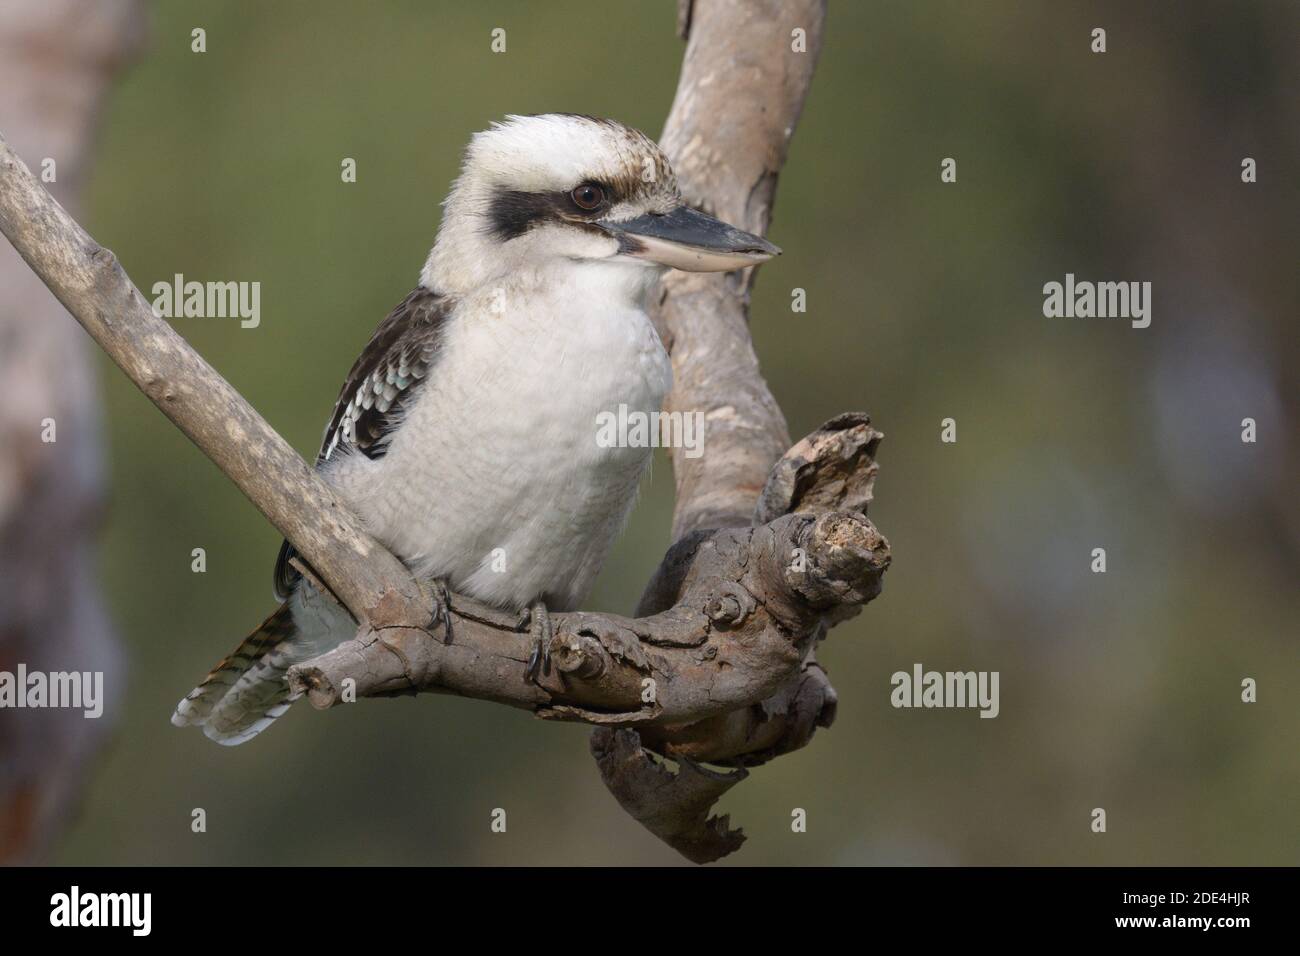 Laughing Kookaburra (Dacelo novaeguineae) perched on a branch in the wild Stock Photo